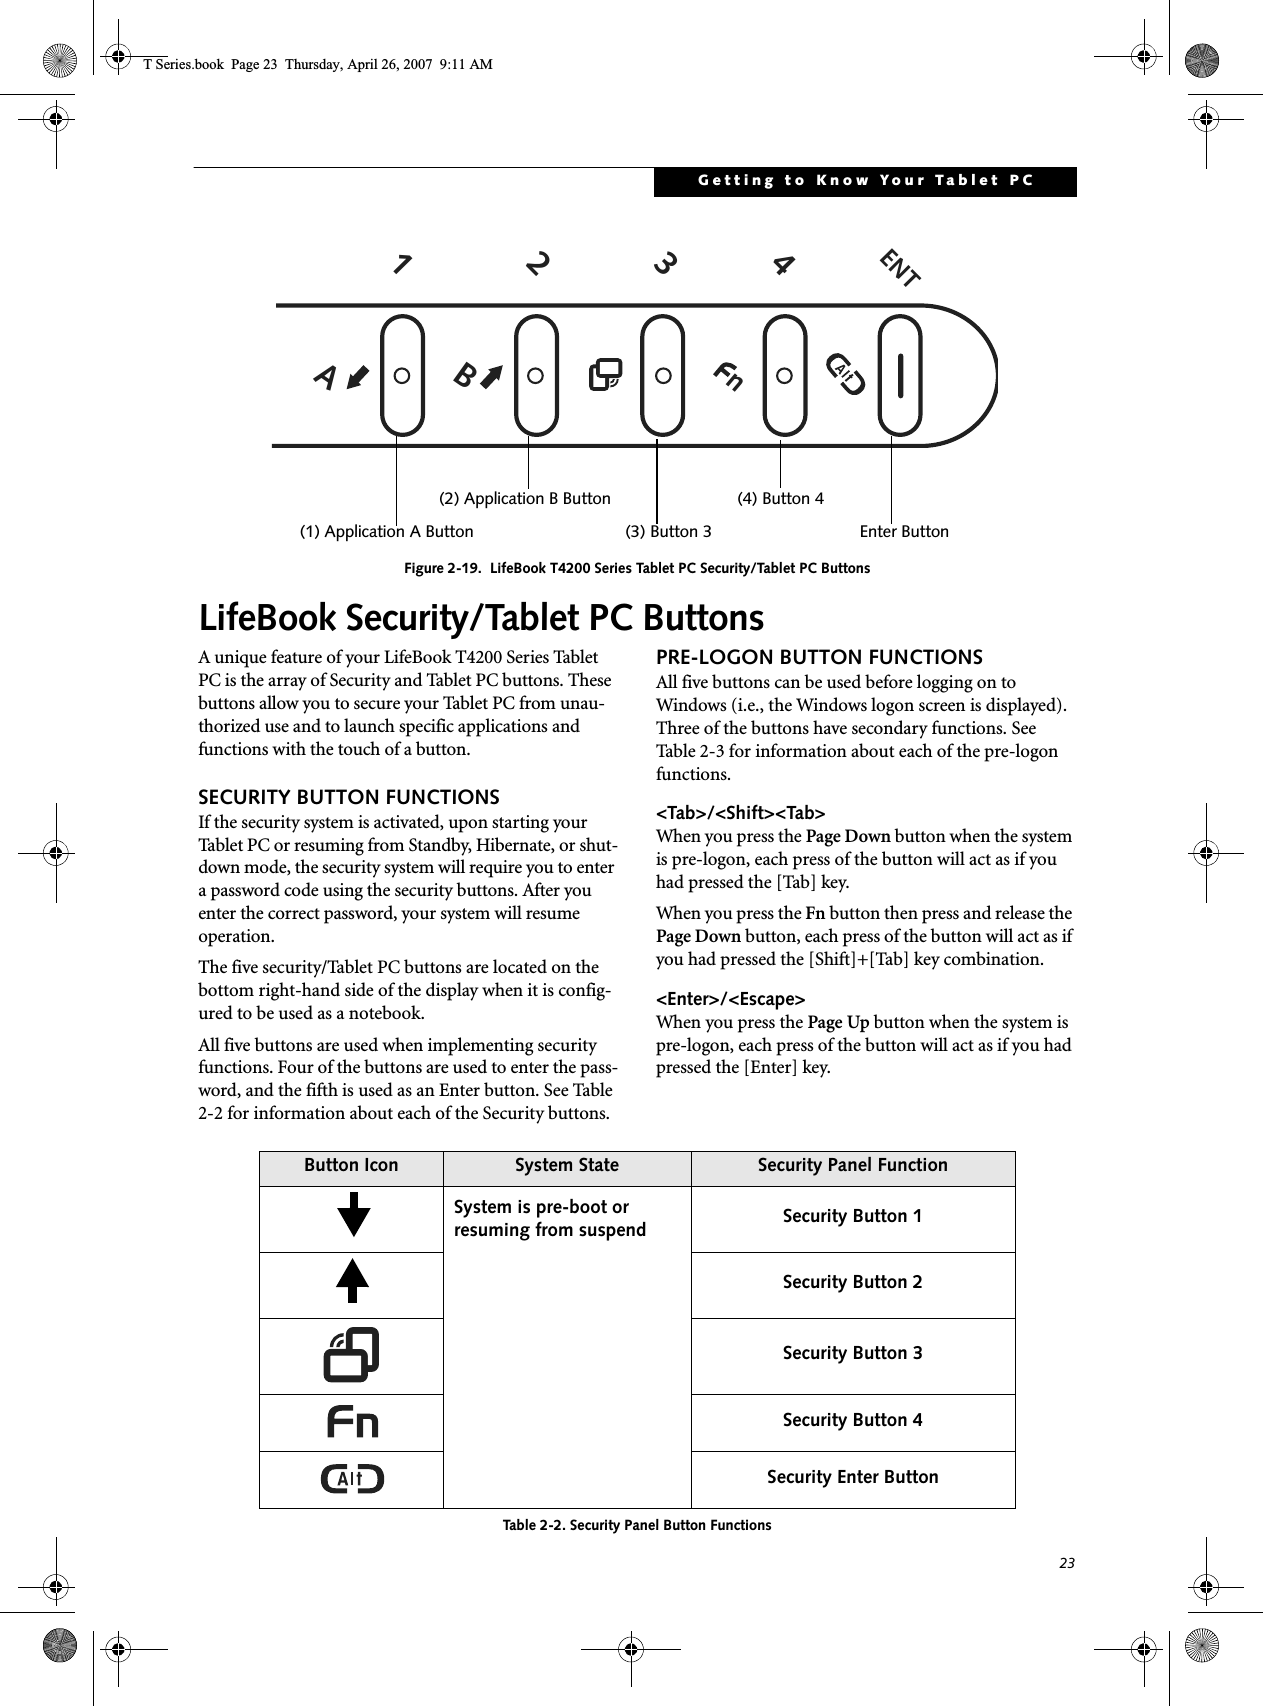 23Getting to Know Your Tablet PCFigure 2-19.  LifeBook T4200 Series Tablet PC Security/Tablet PC Buttons LifeBook Security/Tablet PC ButtonsA unique feature of your LifeBook T4200 Series Tablet PC is the array of Security and Tablet PC buttons. These buttons allow you to secure your Tablet PC from unau-thorized use and to launch specific applications and functions with the touch of a button. SECURITY BUTTON FUNCTIONSIf the security system is activated, upon starting your Tablet PC or resuming from Standby, Hibernate, or shut-down mode, the security system will require you to enter a password code using the security buttons. After you enter the correct password, your system will resume operation. The five security/Tablet PC buttons are located on the bottom right-hand side of the display when it is config-ured to be used as a notebook. All five buttons are used when implementing security functions. Four of the buttons are used to enter the pass-word, and the fifth is used as an Enter button. See Table 2-2 for information about each of the Security buttons.PRE-LOGON BUTTON FUNCTIONSAll five buttons can be used before logging on to Windows (i.e., the Windows logon screen is displayed). Three of the buttons have secondary functions. See Table 2-3 for information about each of the pre-logon functions.&lt;Tab&gt;/&lt;Shift&gt;&lt;Tab&gt;When you press the Page Down button when the system is pre-logon, each press of the button will act as if you had pressed the [Tab] key.When you press the Fn button then press and release the Page Down button, each press of the button will act as if you had pressed the [Shift]+[Tab] key combination.&lt;Enter&gt;/&lt;Escape&gt;When you press the Page Up button when the system is pre-logon, each press of the button will act as if you had pressed the [Enter] key.Table 2-2. Security Panel Button FunctionsABn1234ENT(1) Application A Button (3) Button 3(2) Application B Button (4) Button 4Enter ButtonButton Icon  System State Security Panel FunctionSystem is pre-boot or resuming from suspend  Security Button 1Security Button 2Security Button 3Security Button 4Security Enter ButtonT Series.book  Page 23  Thursday, April 26, 2007  9:11 AM